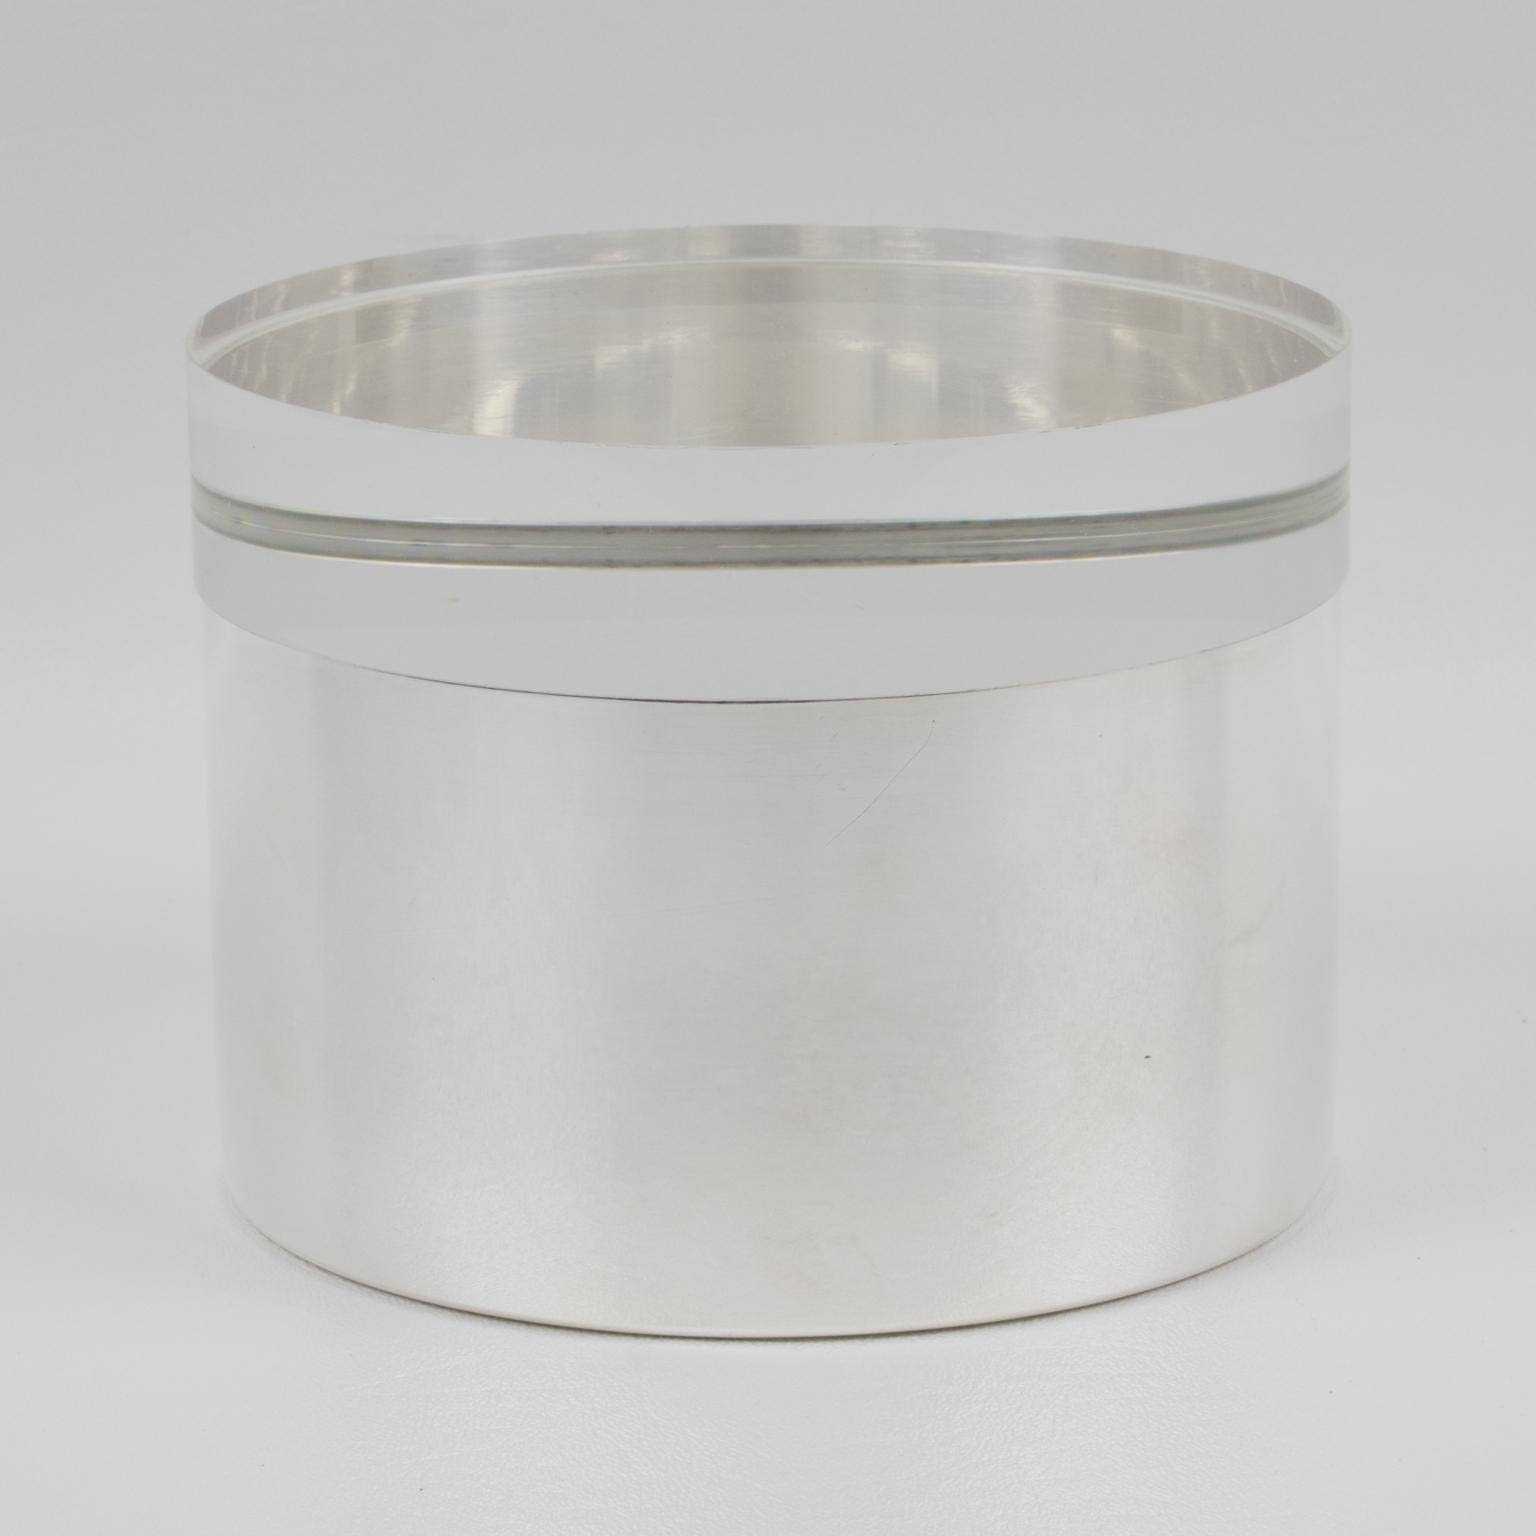 This lovely decorative box by Debladis Paris was designed in the 1960s. The rounded shape boasts a silverplate base and an extra thick lid in crystal clear Lucite. The piece is marked underside with legal silversmith hallmarks.
The box is in good